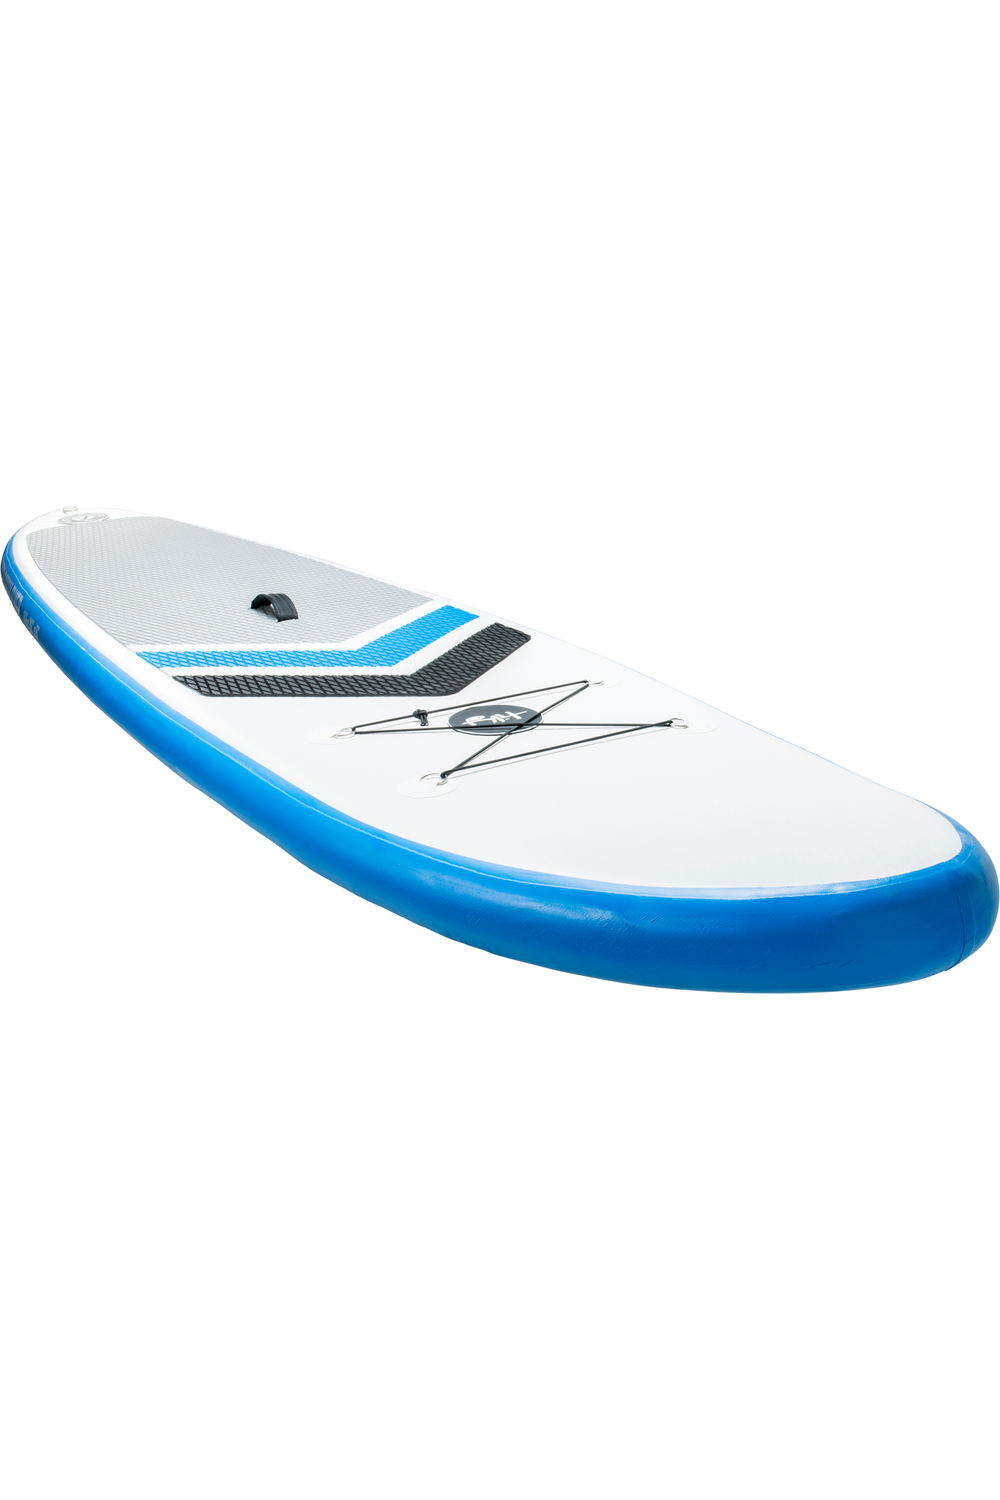 Tiki 11'6 Stowaway Flyer Inflatable Sup + Accessories